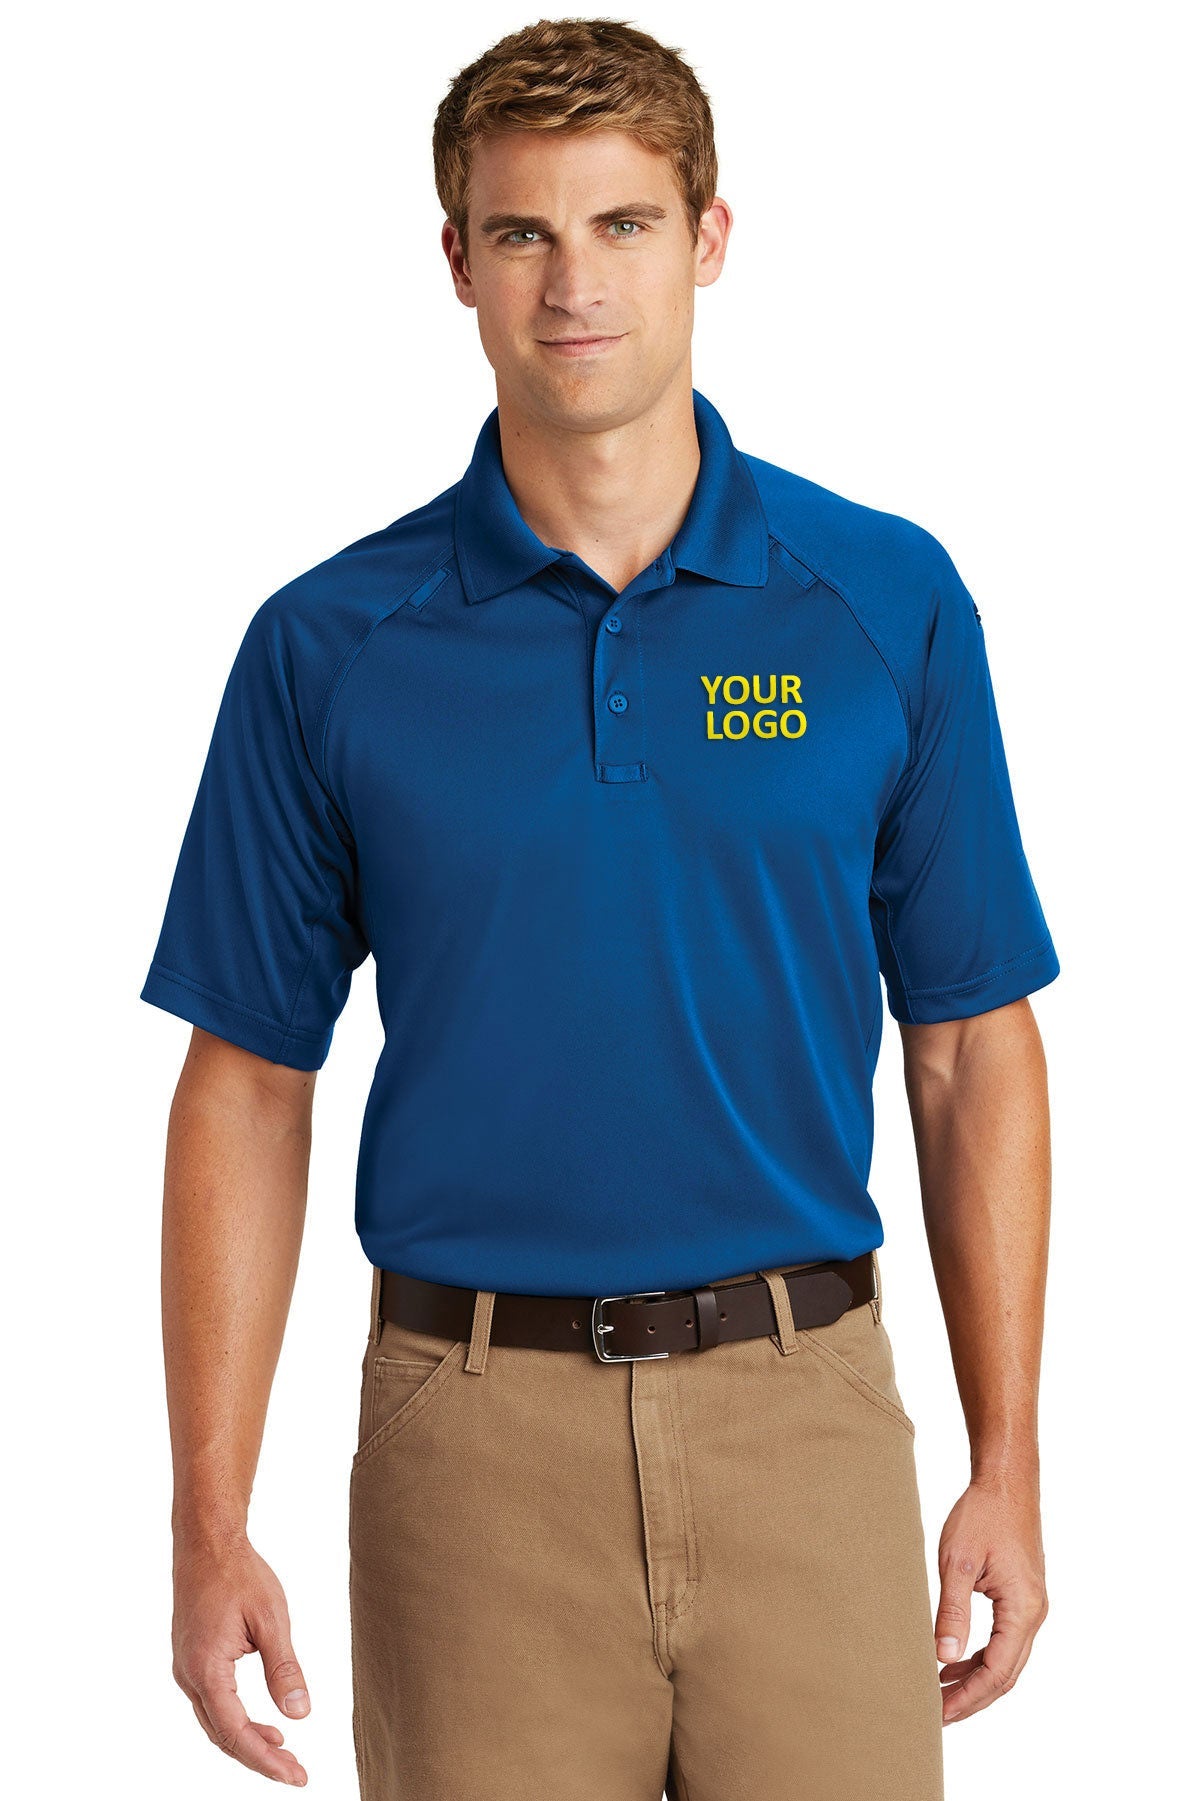 CornerStone Royal CS410 embroidered polo shirts for business